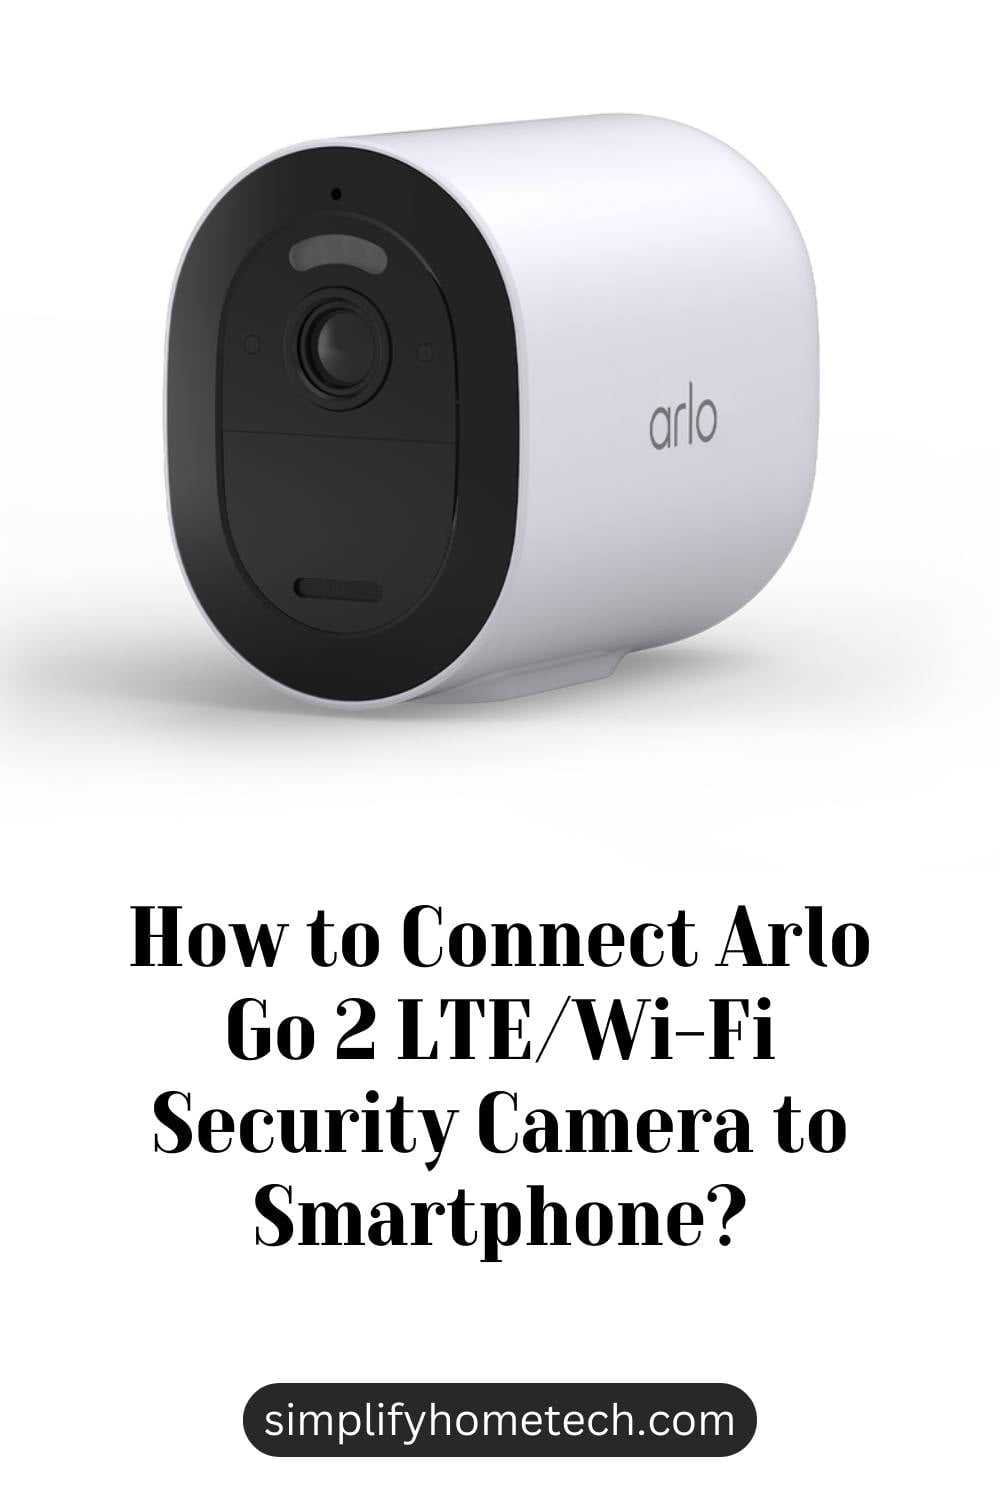 How to Connect Arlo Go 2 LTE/Wi-Fi Security Camera to Smartphone?